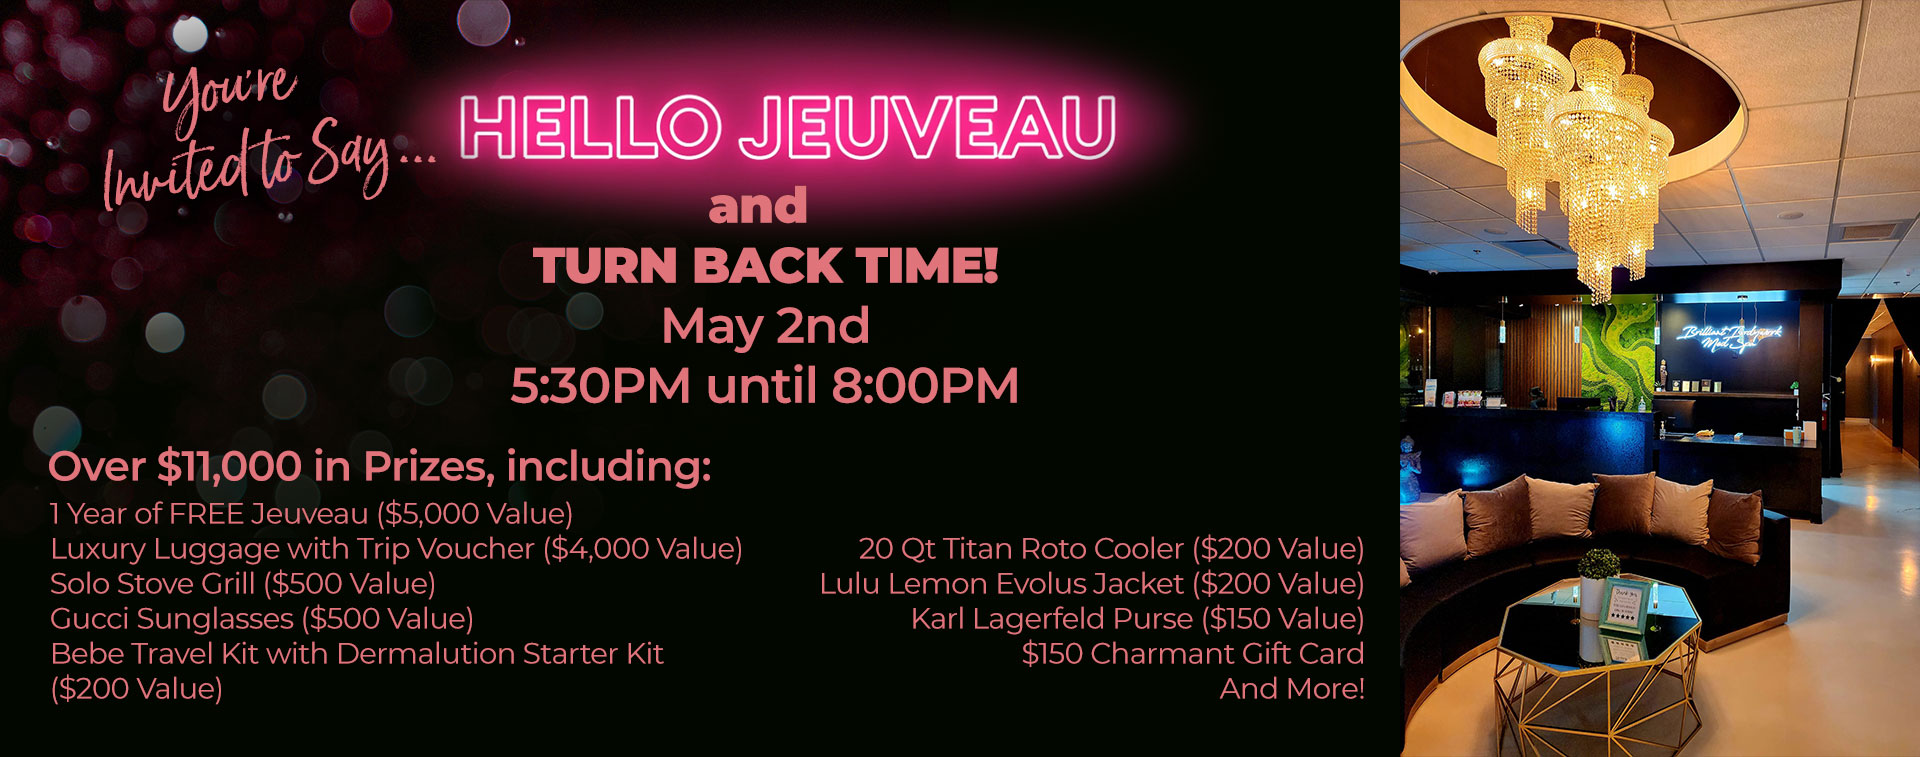 you're invited to say hello jeuveau and turn back time. Join us May 2nd for our special event and prizes.